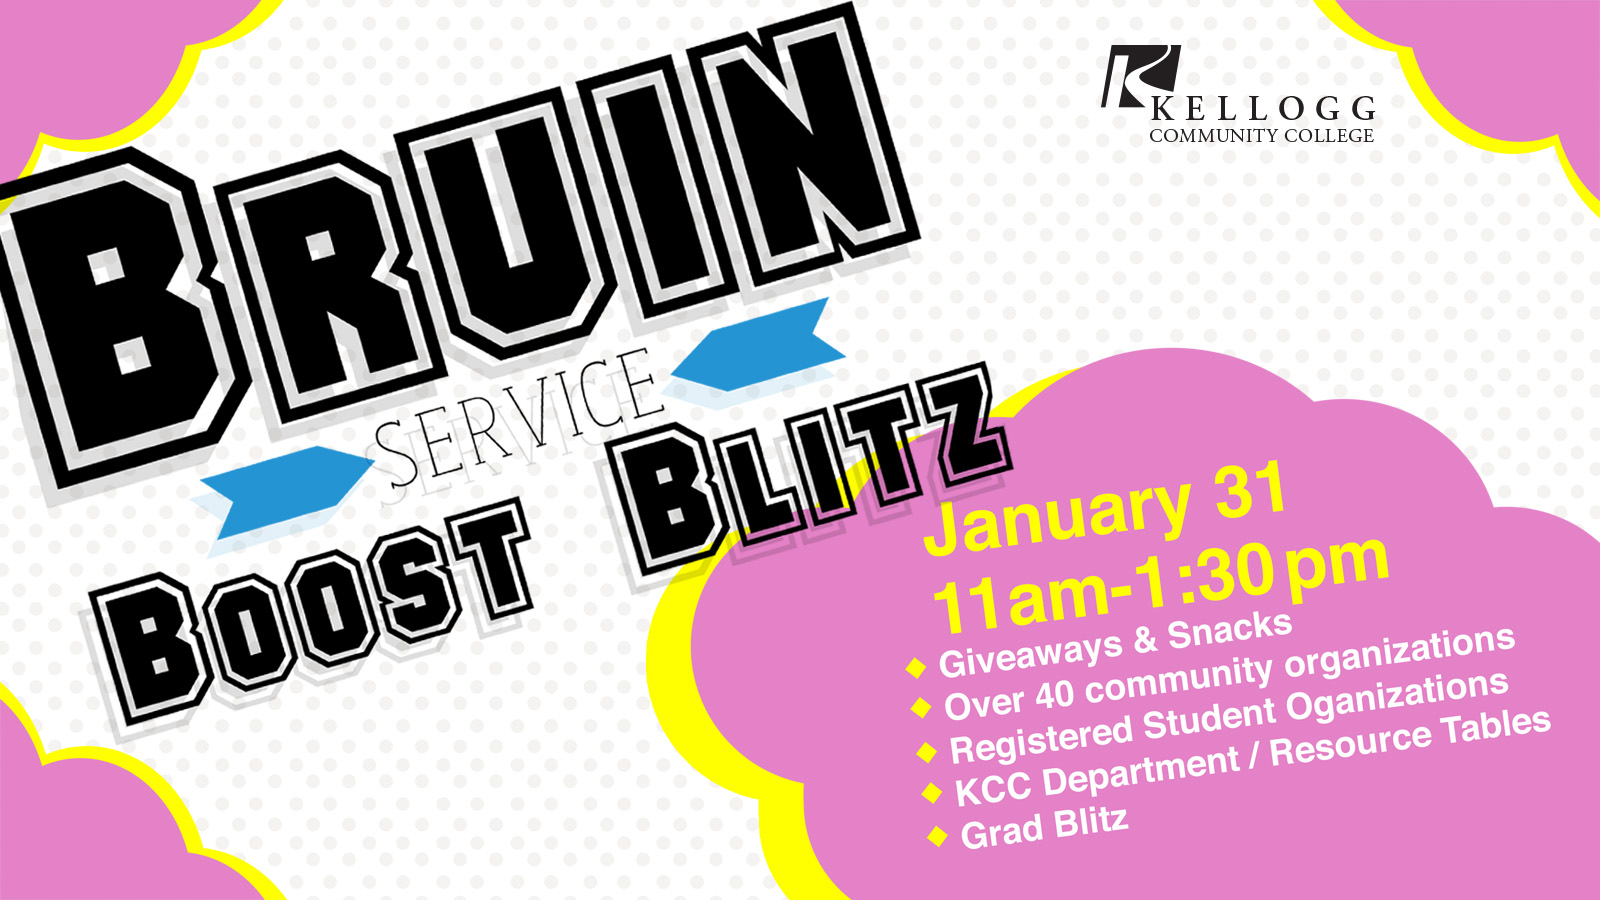 A text slide highlighting KCC's Bruin Boost Service Blitz, scheduled for 11 a.m. to 1:30 p.m. Jan. 31 on KCC's North Avenue campus in Battle Creek.